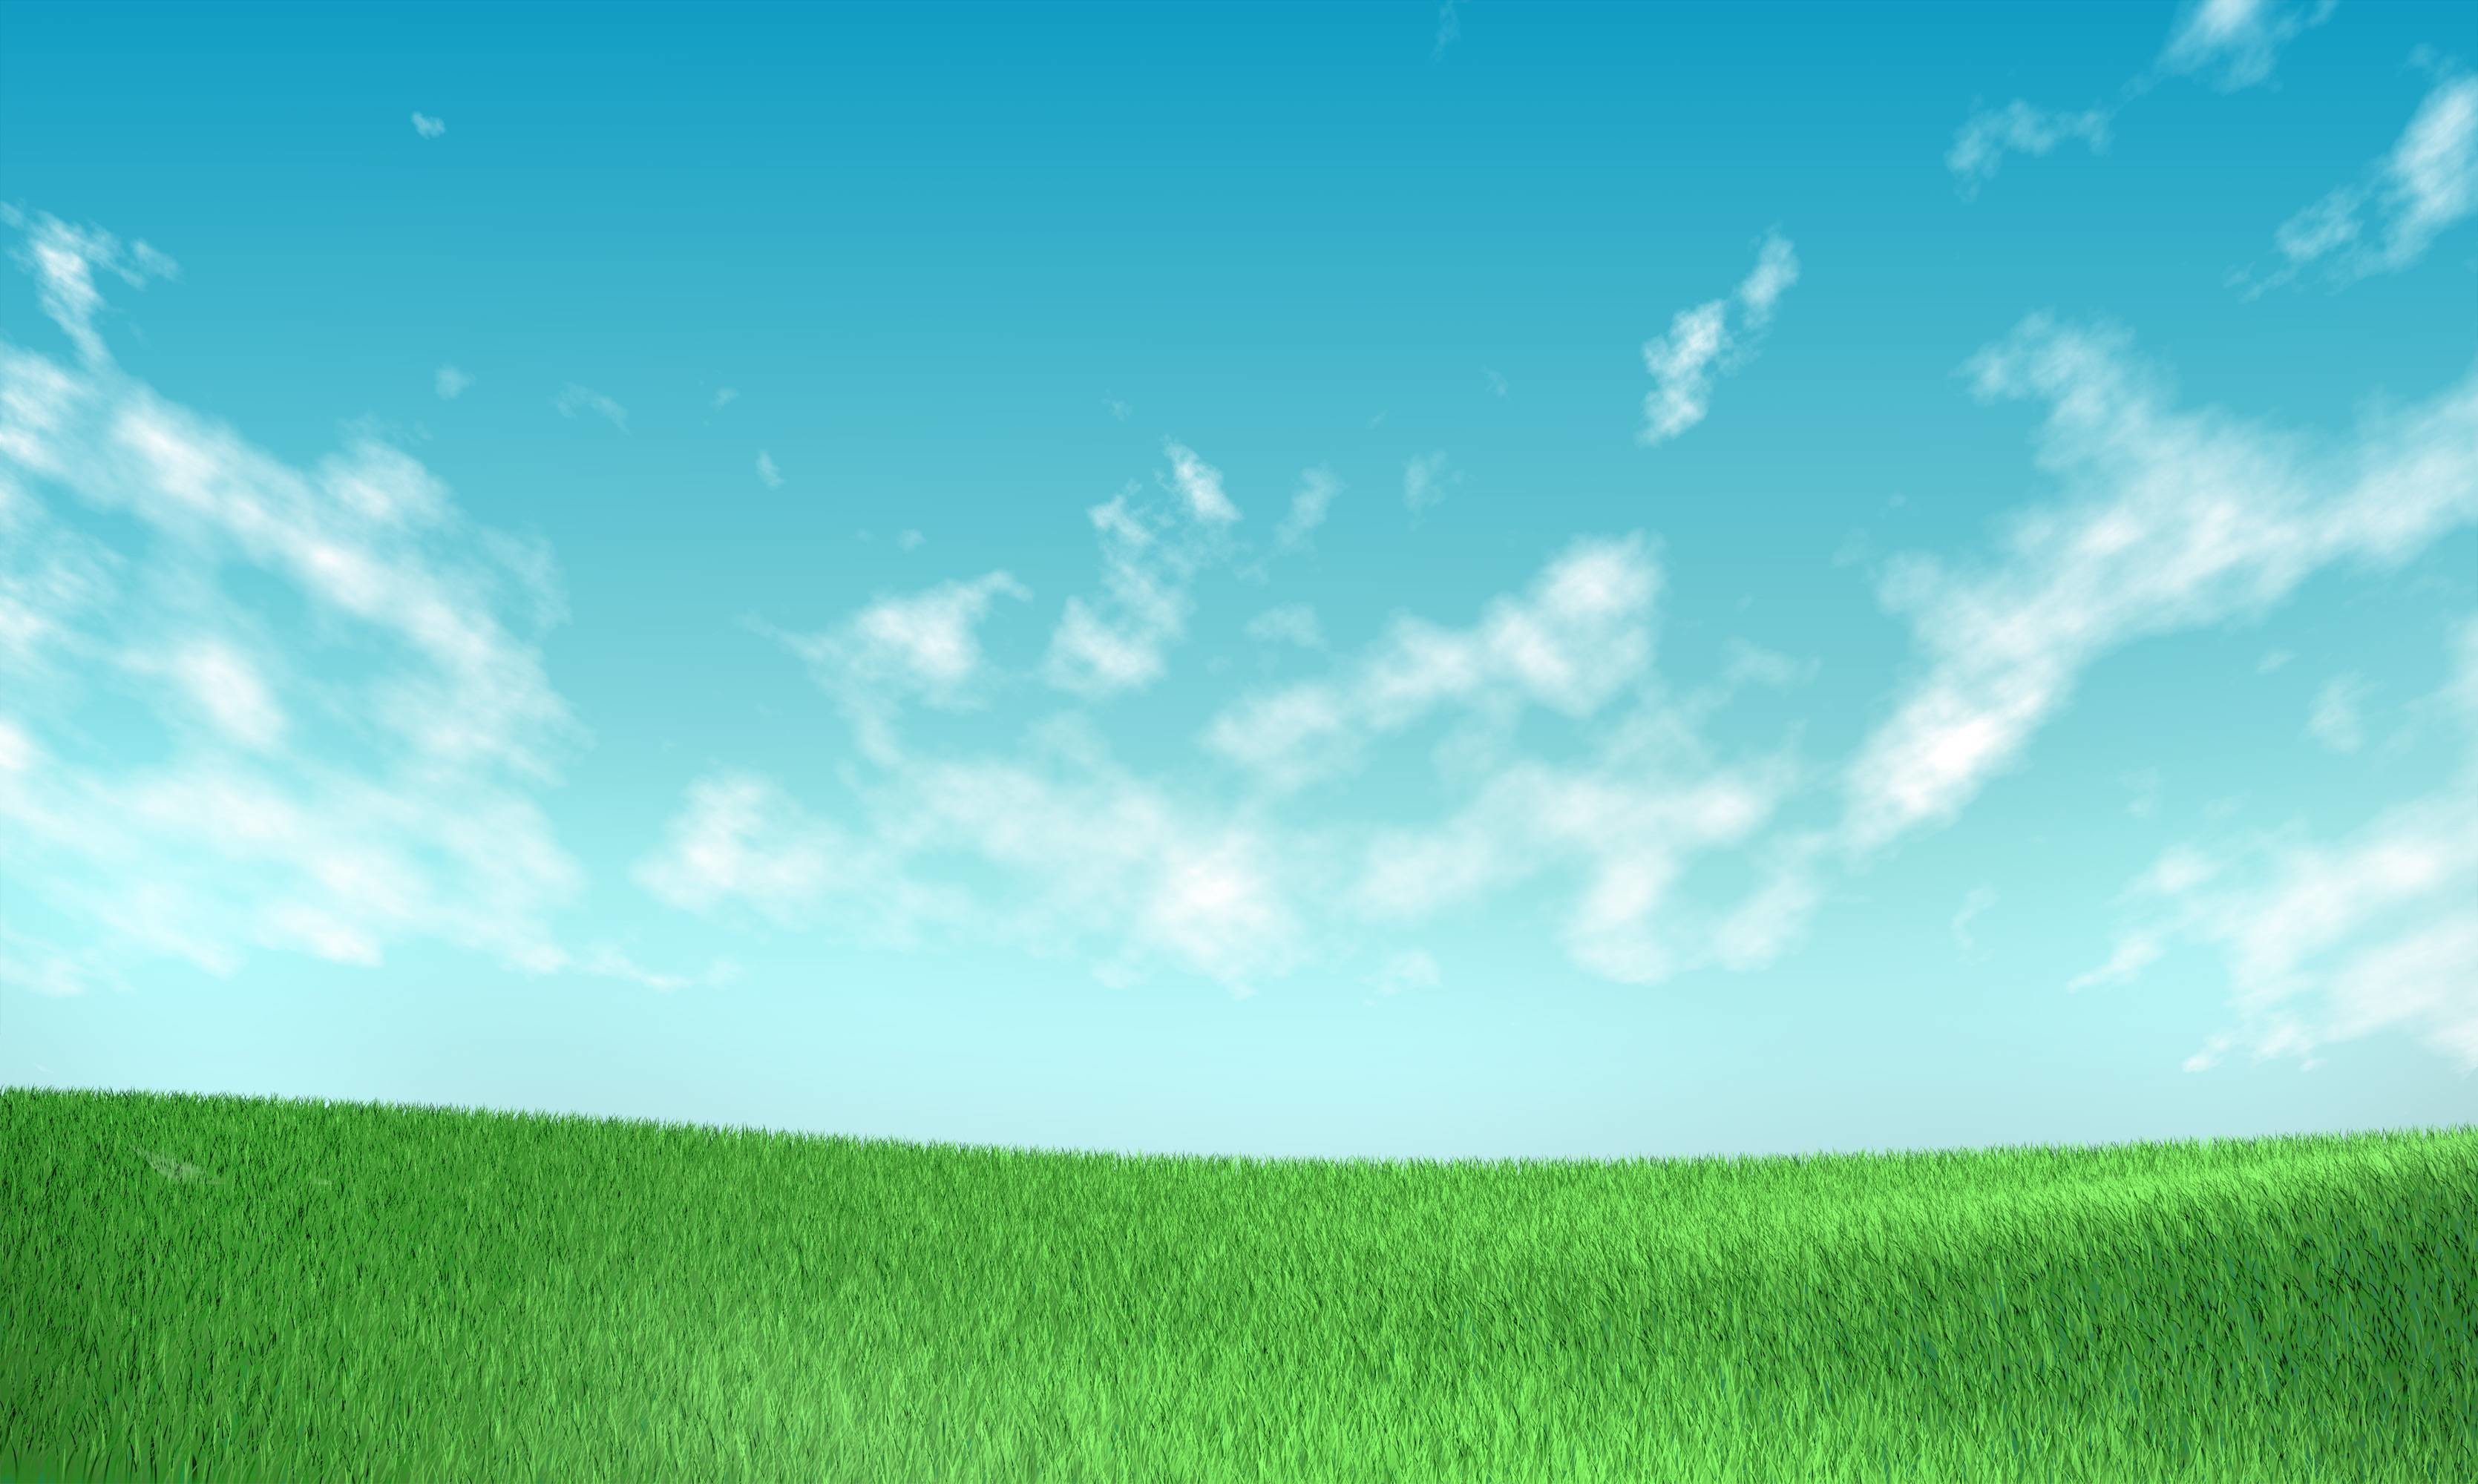 Grass And Sky Background Wallpaper Hd Image 10879 
 - Grass And Sky Background Hd - HD Wallpaper 